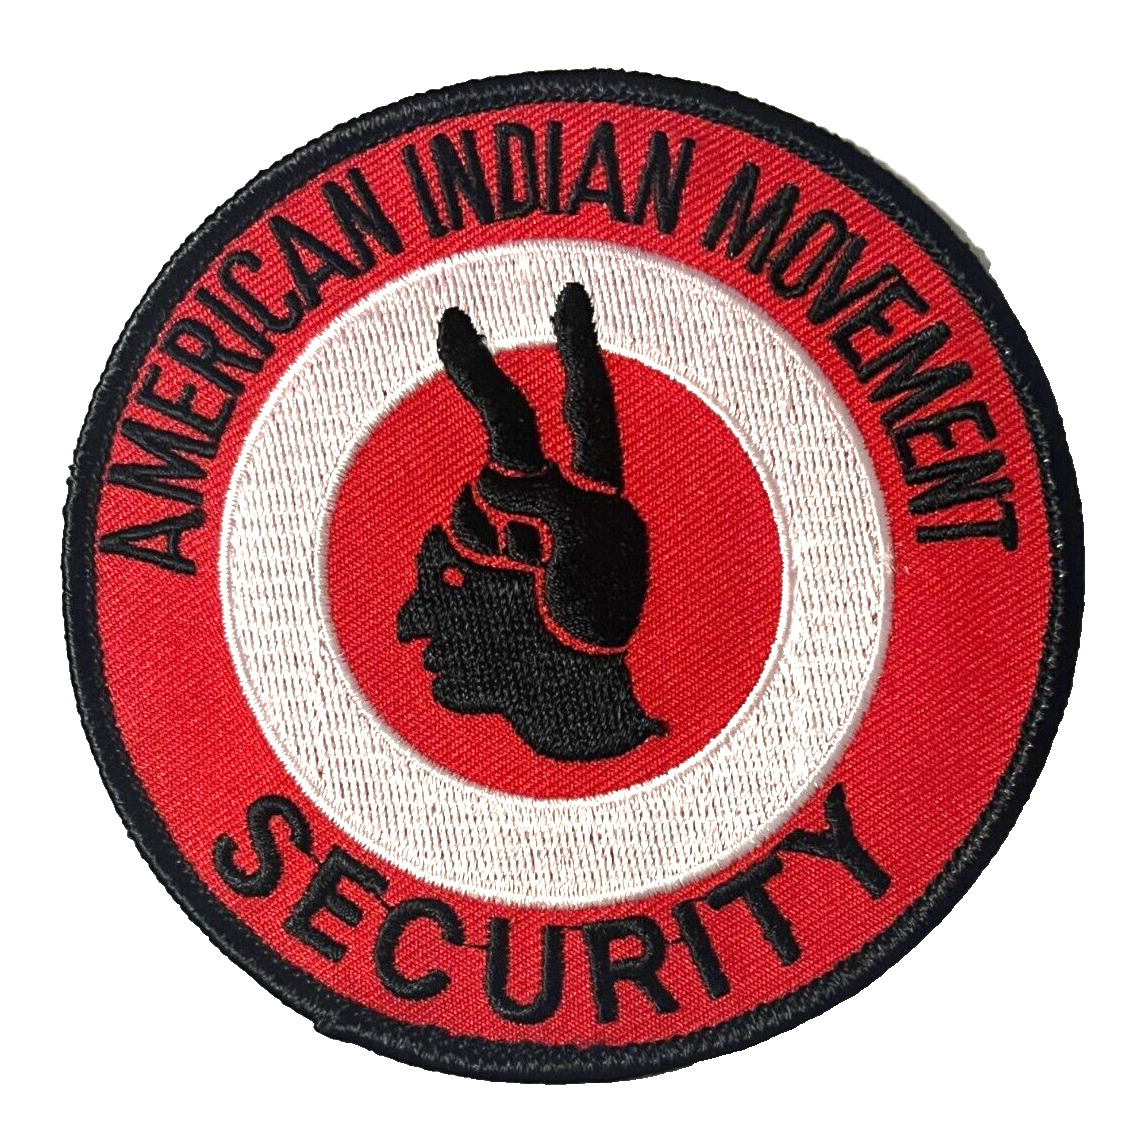 AMERICAN INDIAN MOVEMENT (AIM) SECURITY PATCH (NC)